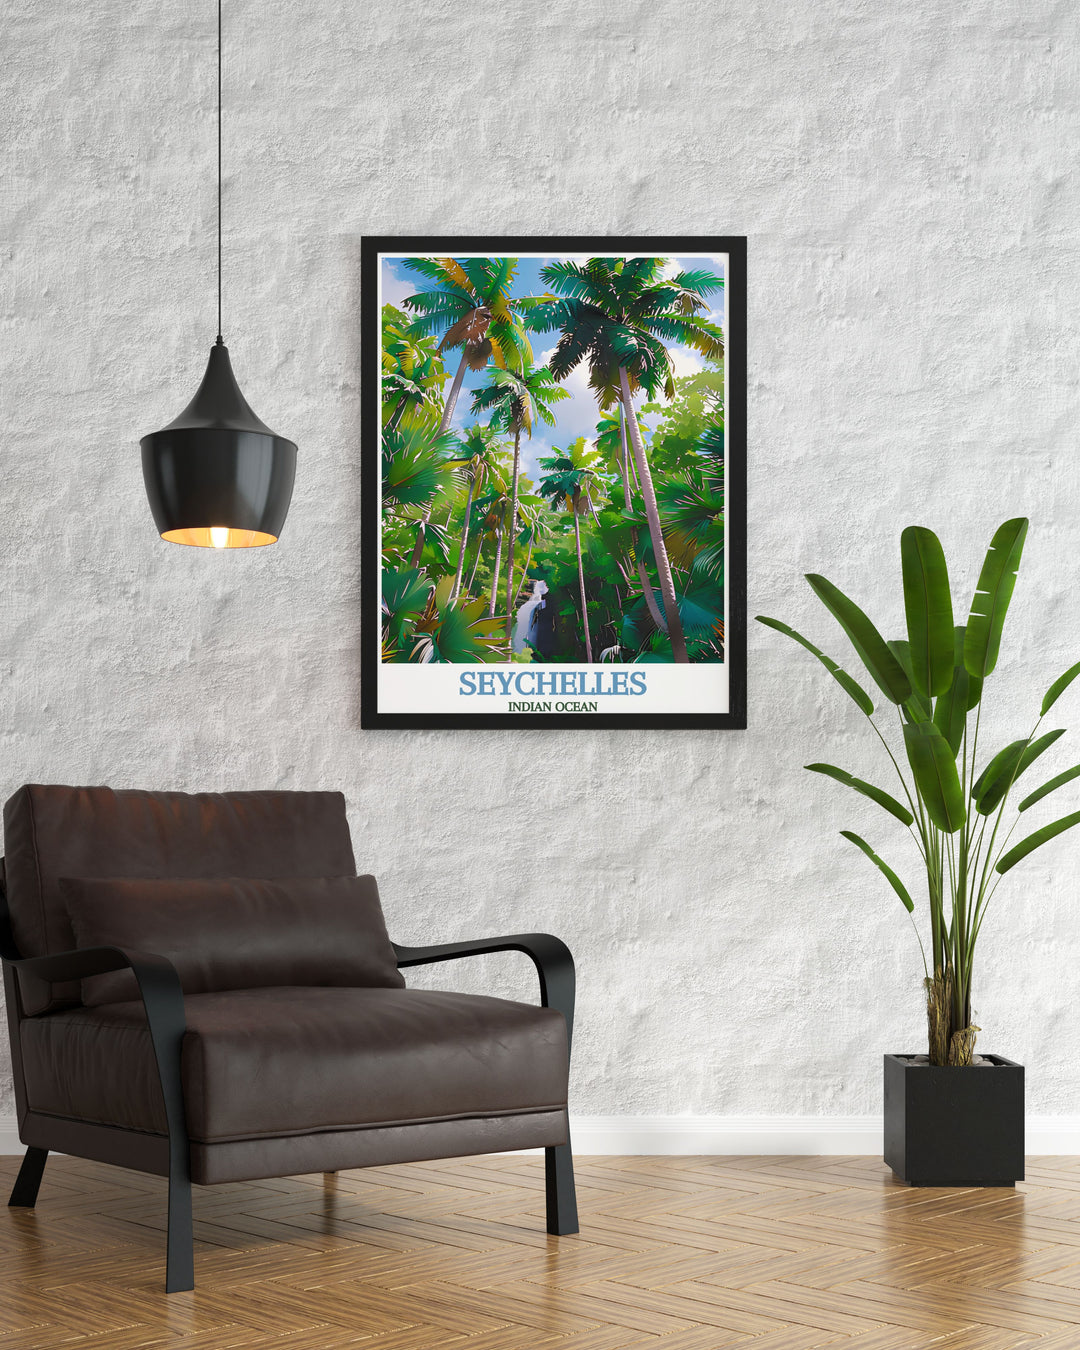 This poster of Vallée de Mai and the Indian Ocean captures the stunning natural beauty and serene atmosphere of Seychelles, inviting viewers to explore this tropical gem.